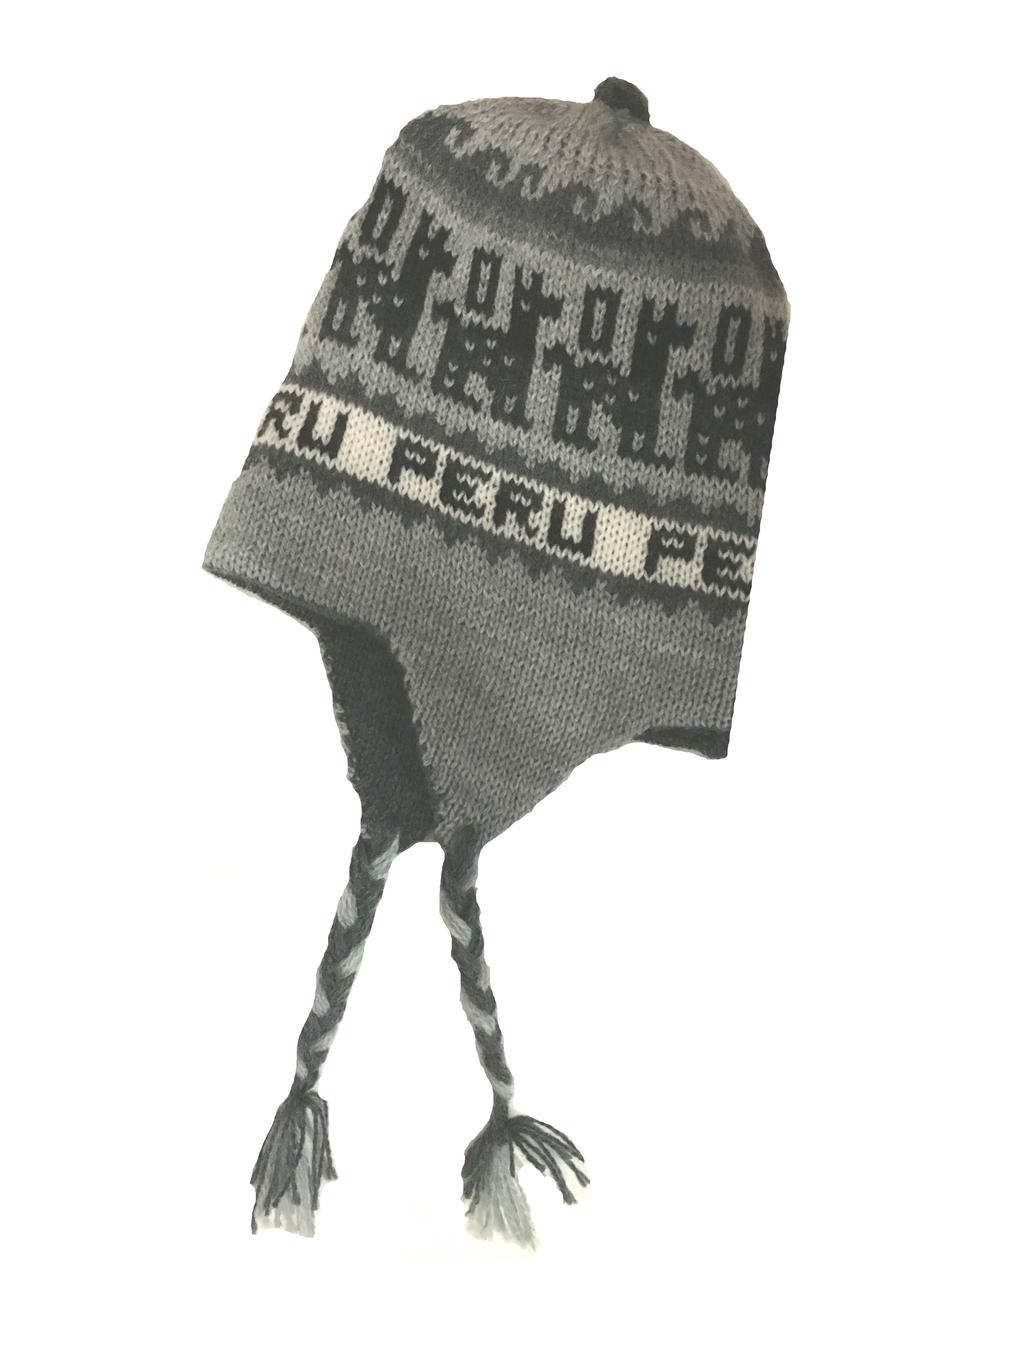 Chullo The chullo is a style of hat that originates in the Andean Altiplano region of Peru. It is also used in other Andean regions of South America.